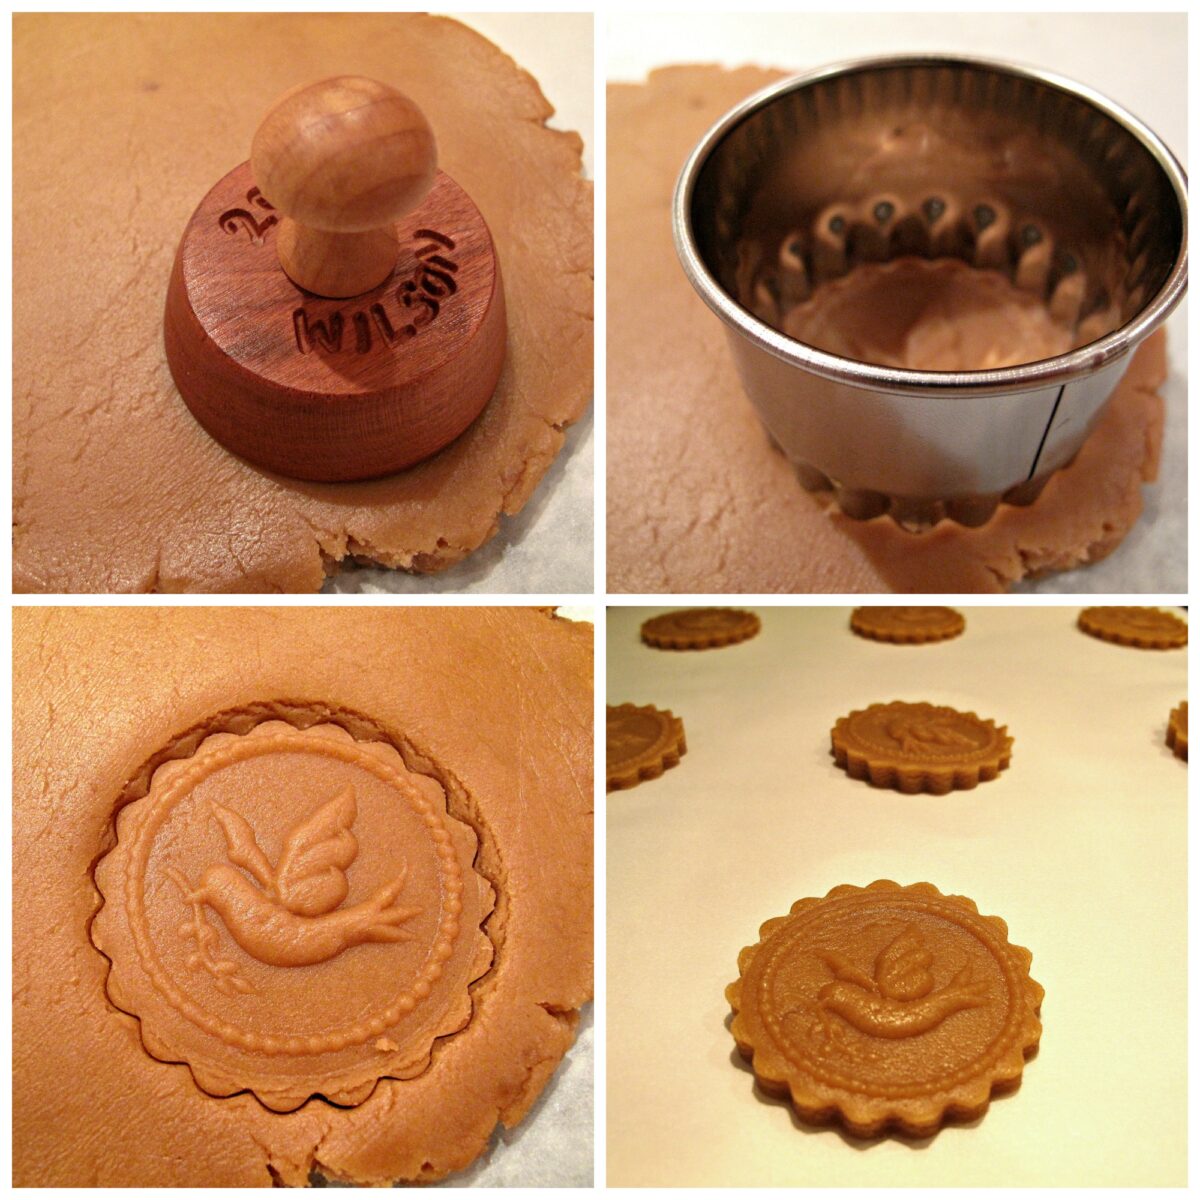 Instructions: press in mold, cut out cookie with cookie cutter, remove cutter, transfer to baking sheet.